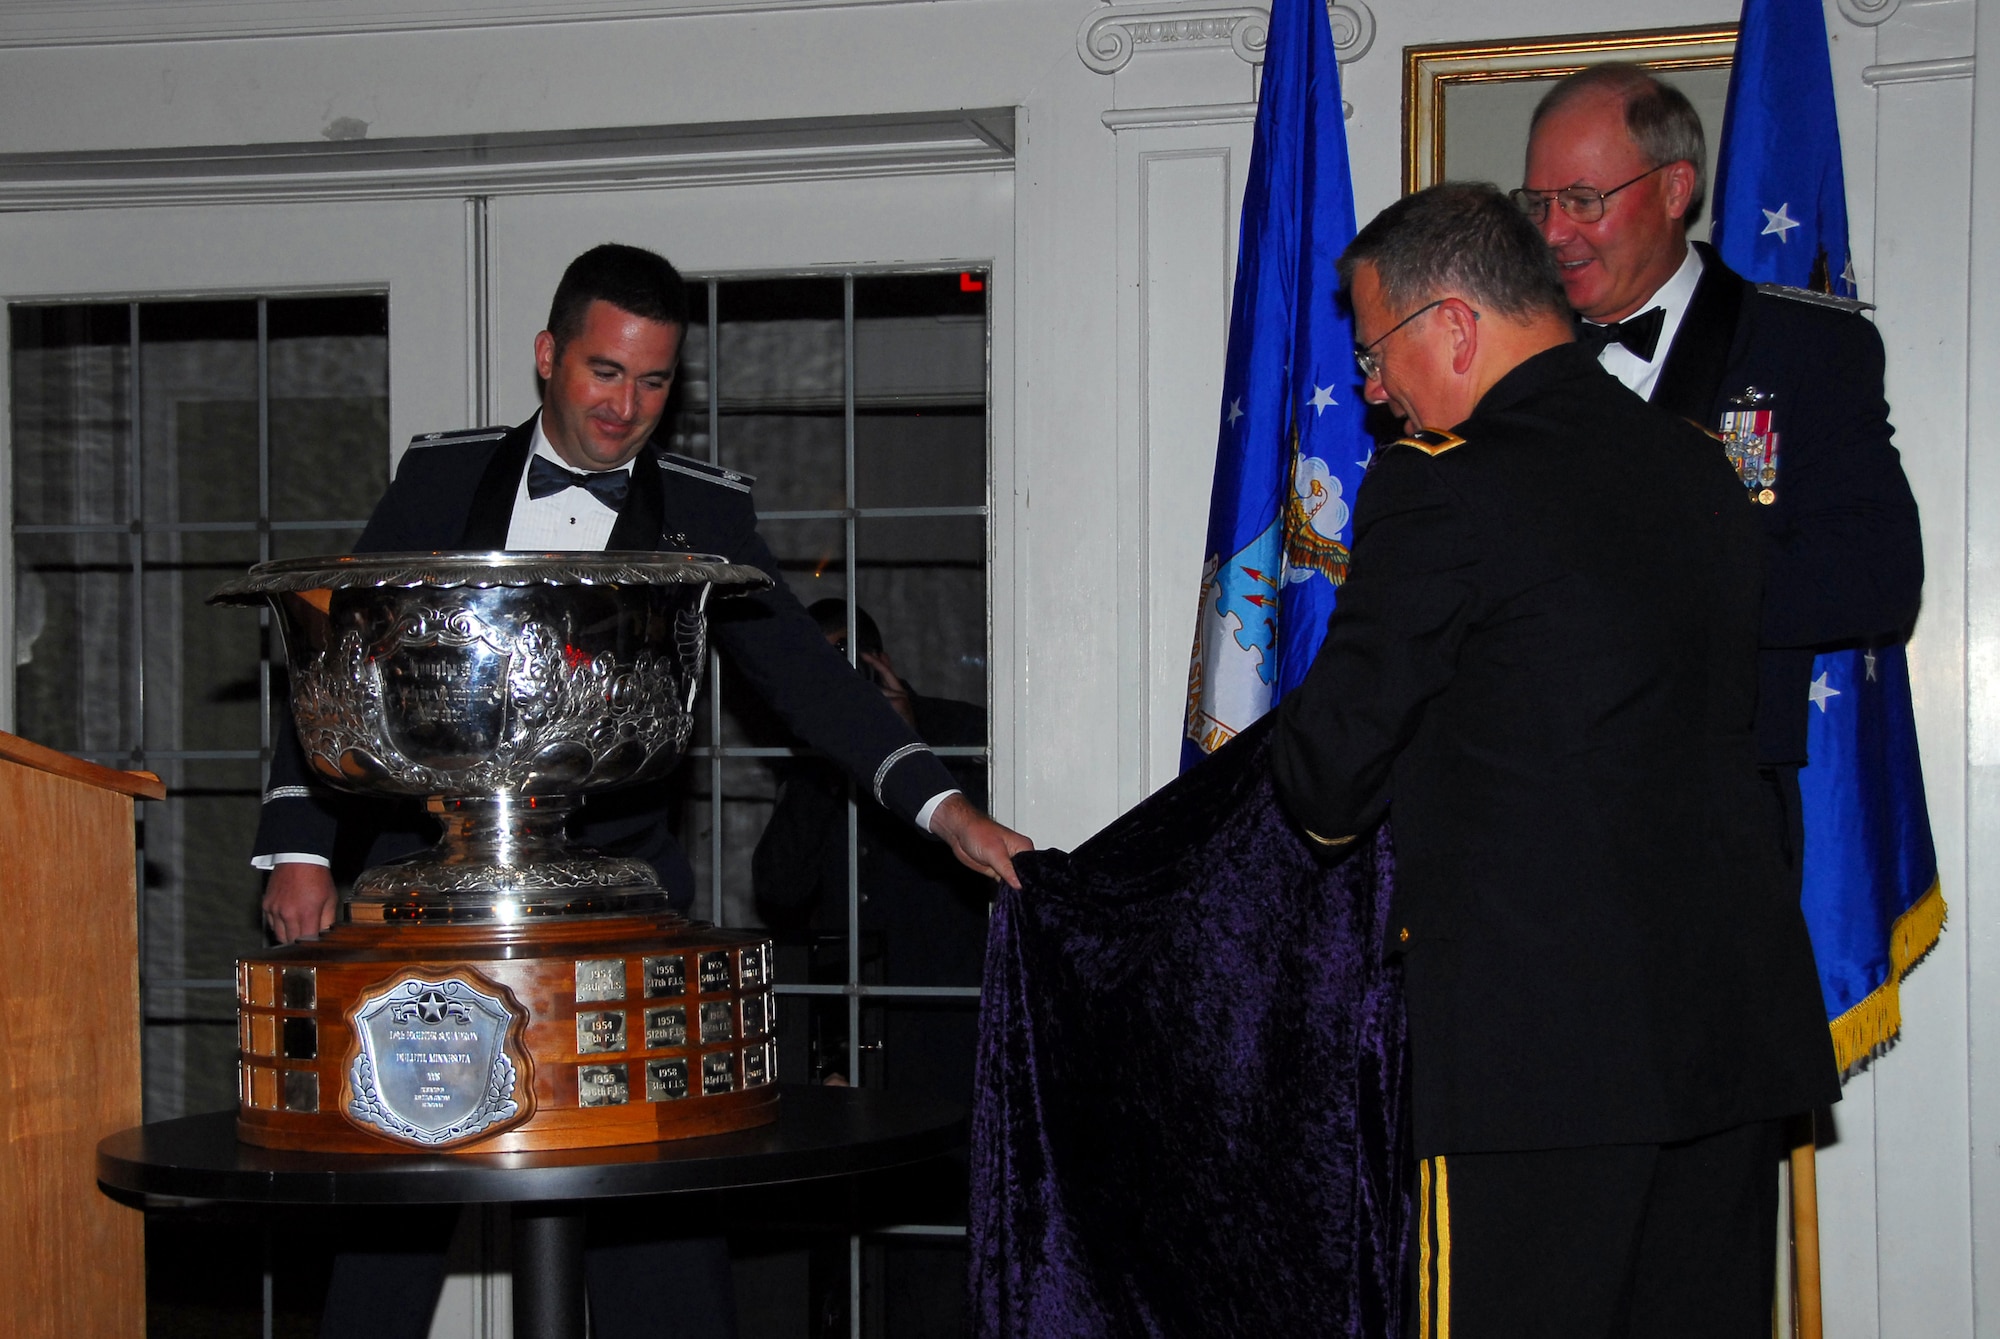 U.S. Air Force Lt. Col. Eric Chandler (left), Commander of the 179th Fighter Squadron, Duluth, Minn., along with General Craig R. McKinley-Chief, National Guard Bureau, and U.S. Army Major General Larry Shellito, Adjutant General of the Minnesota National Guard, unveils the prestigious Raytheon Trophy during the awarding presentation July 31, 2009 in Duluth, Minn.  The Raytheon Trophy was awarded to the 179th Fighter Squadron of the 148th Fighter Wing as the most outstanding air defense unit in the U.S. Air Force, marking only the fourth time an Air National Guard unit received this award since its inception in 1953.  (U.S. Air Force photo by Tech. Sgt. Brett R. Ewald)